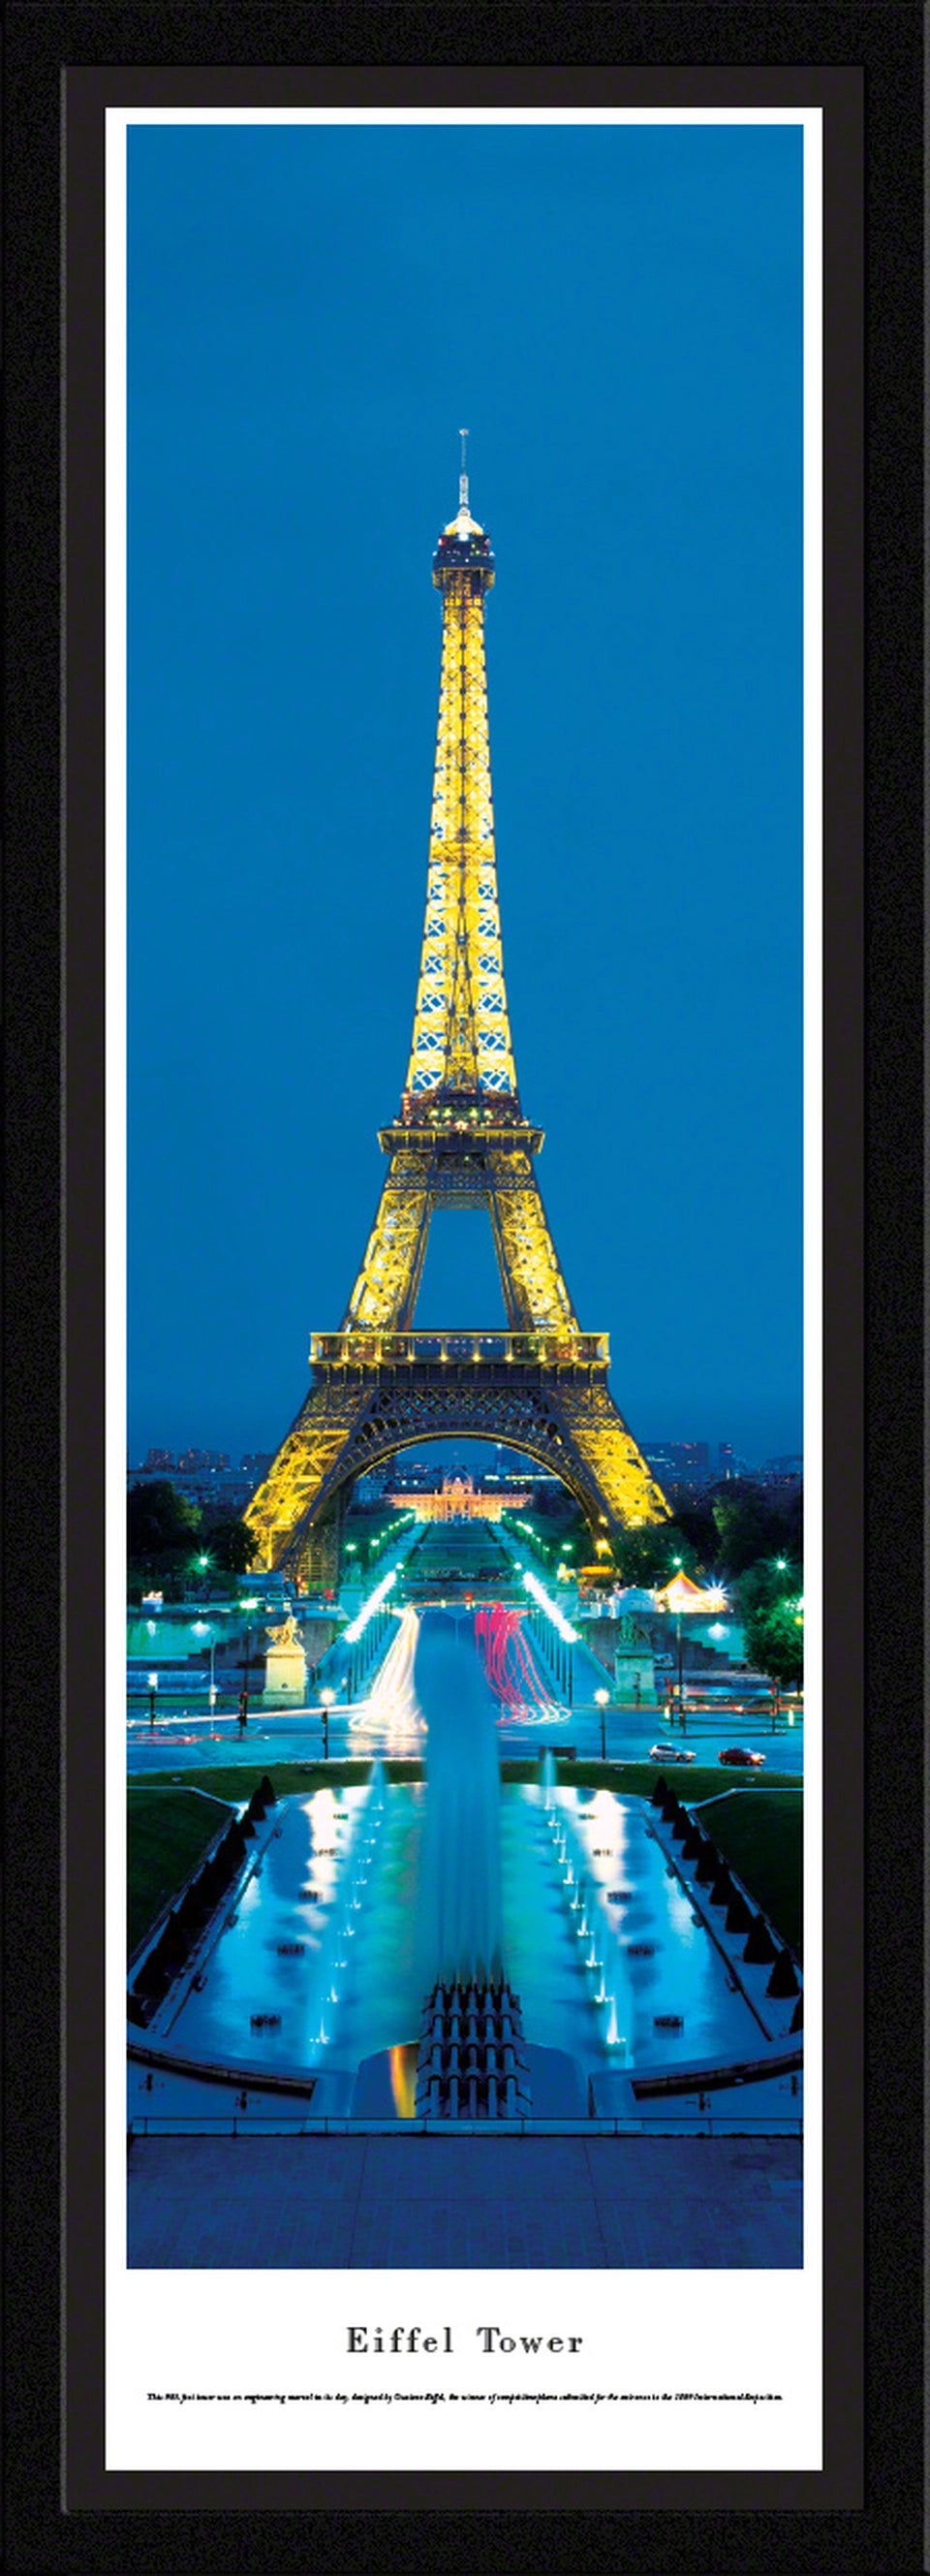 Eiffel Tower Panoramic Picture - Twilight - Vertical Panorama by Blakeway Panoramas